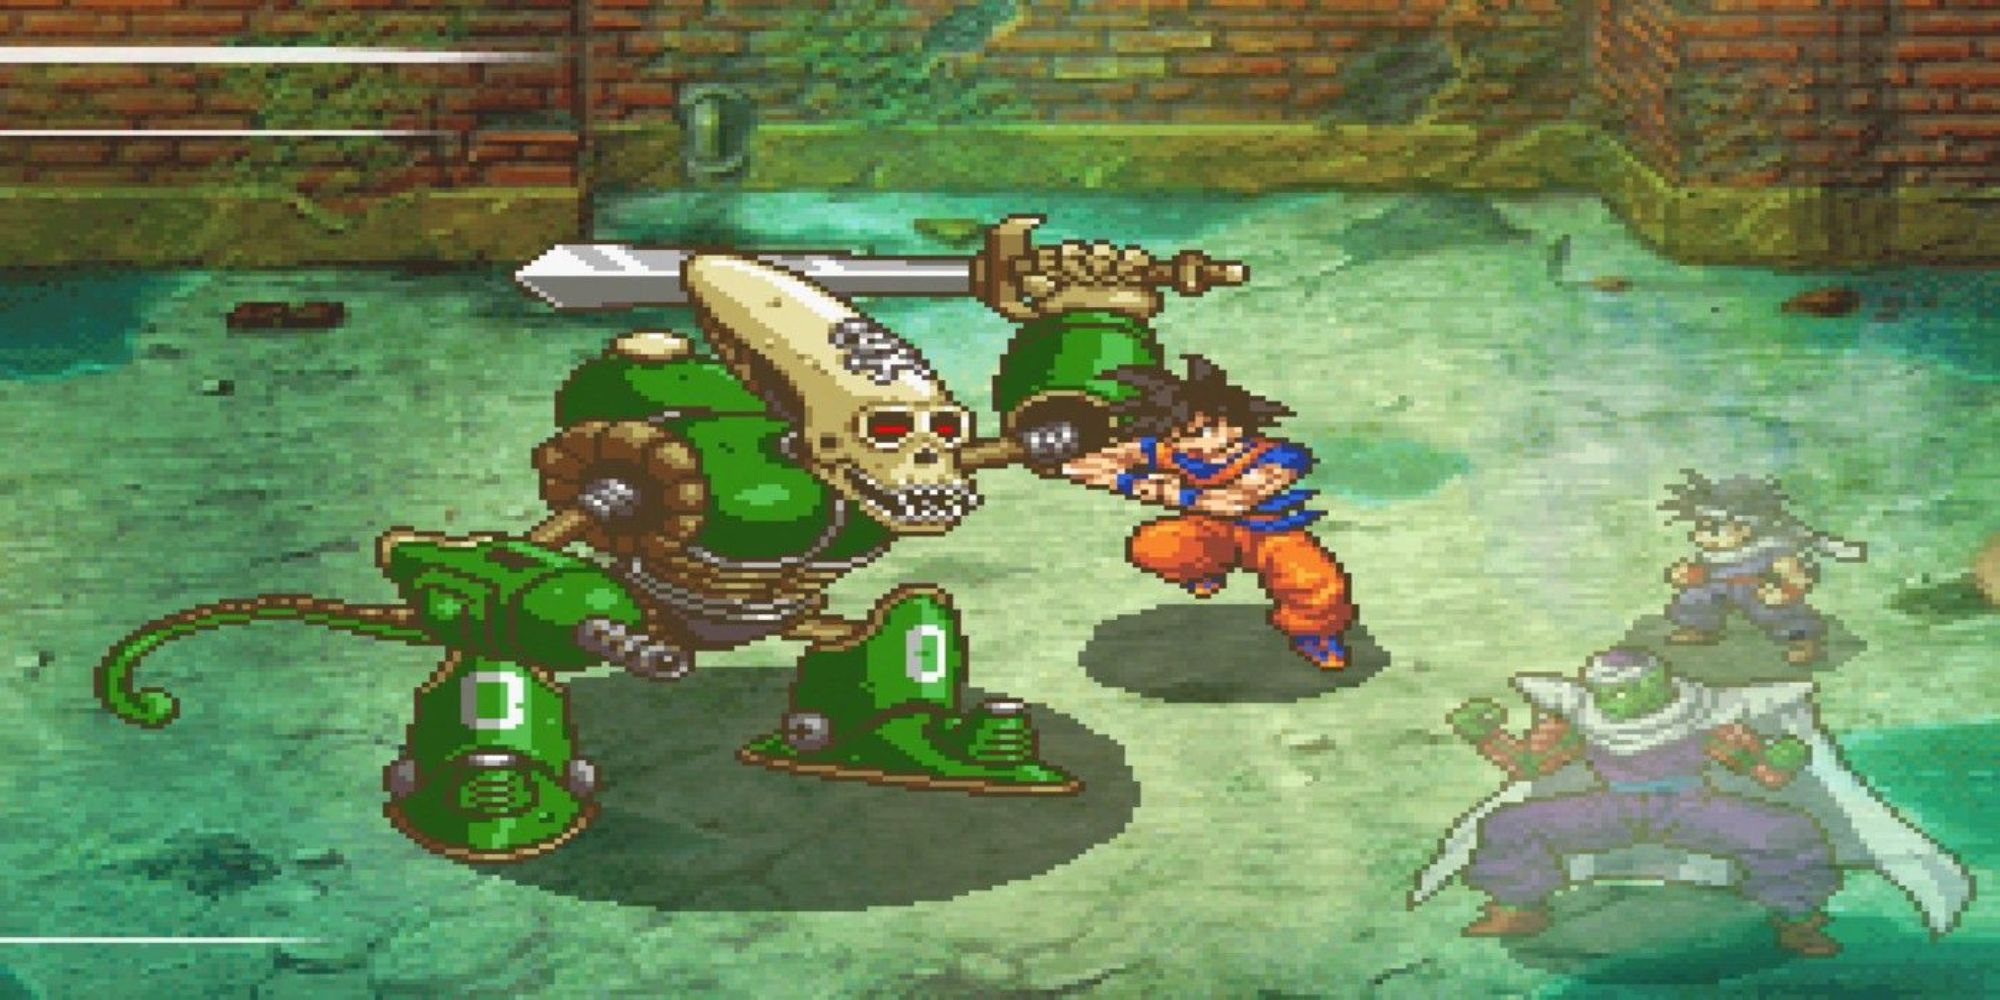 Goku attacking a large green robot with Piccolo and Gohan watching.